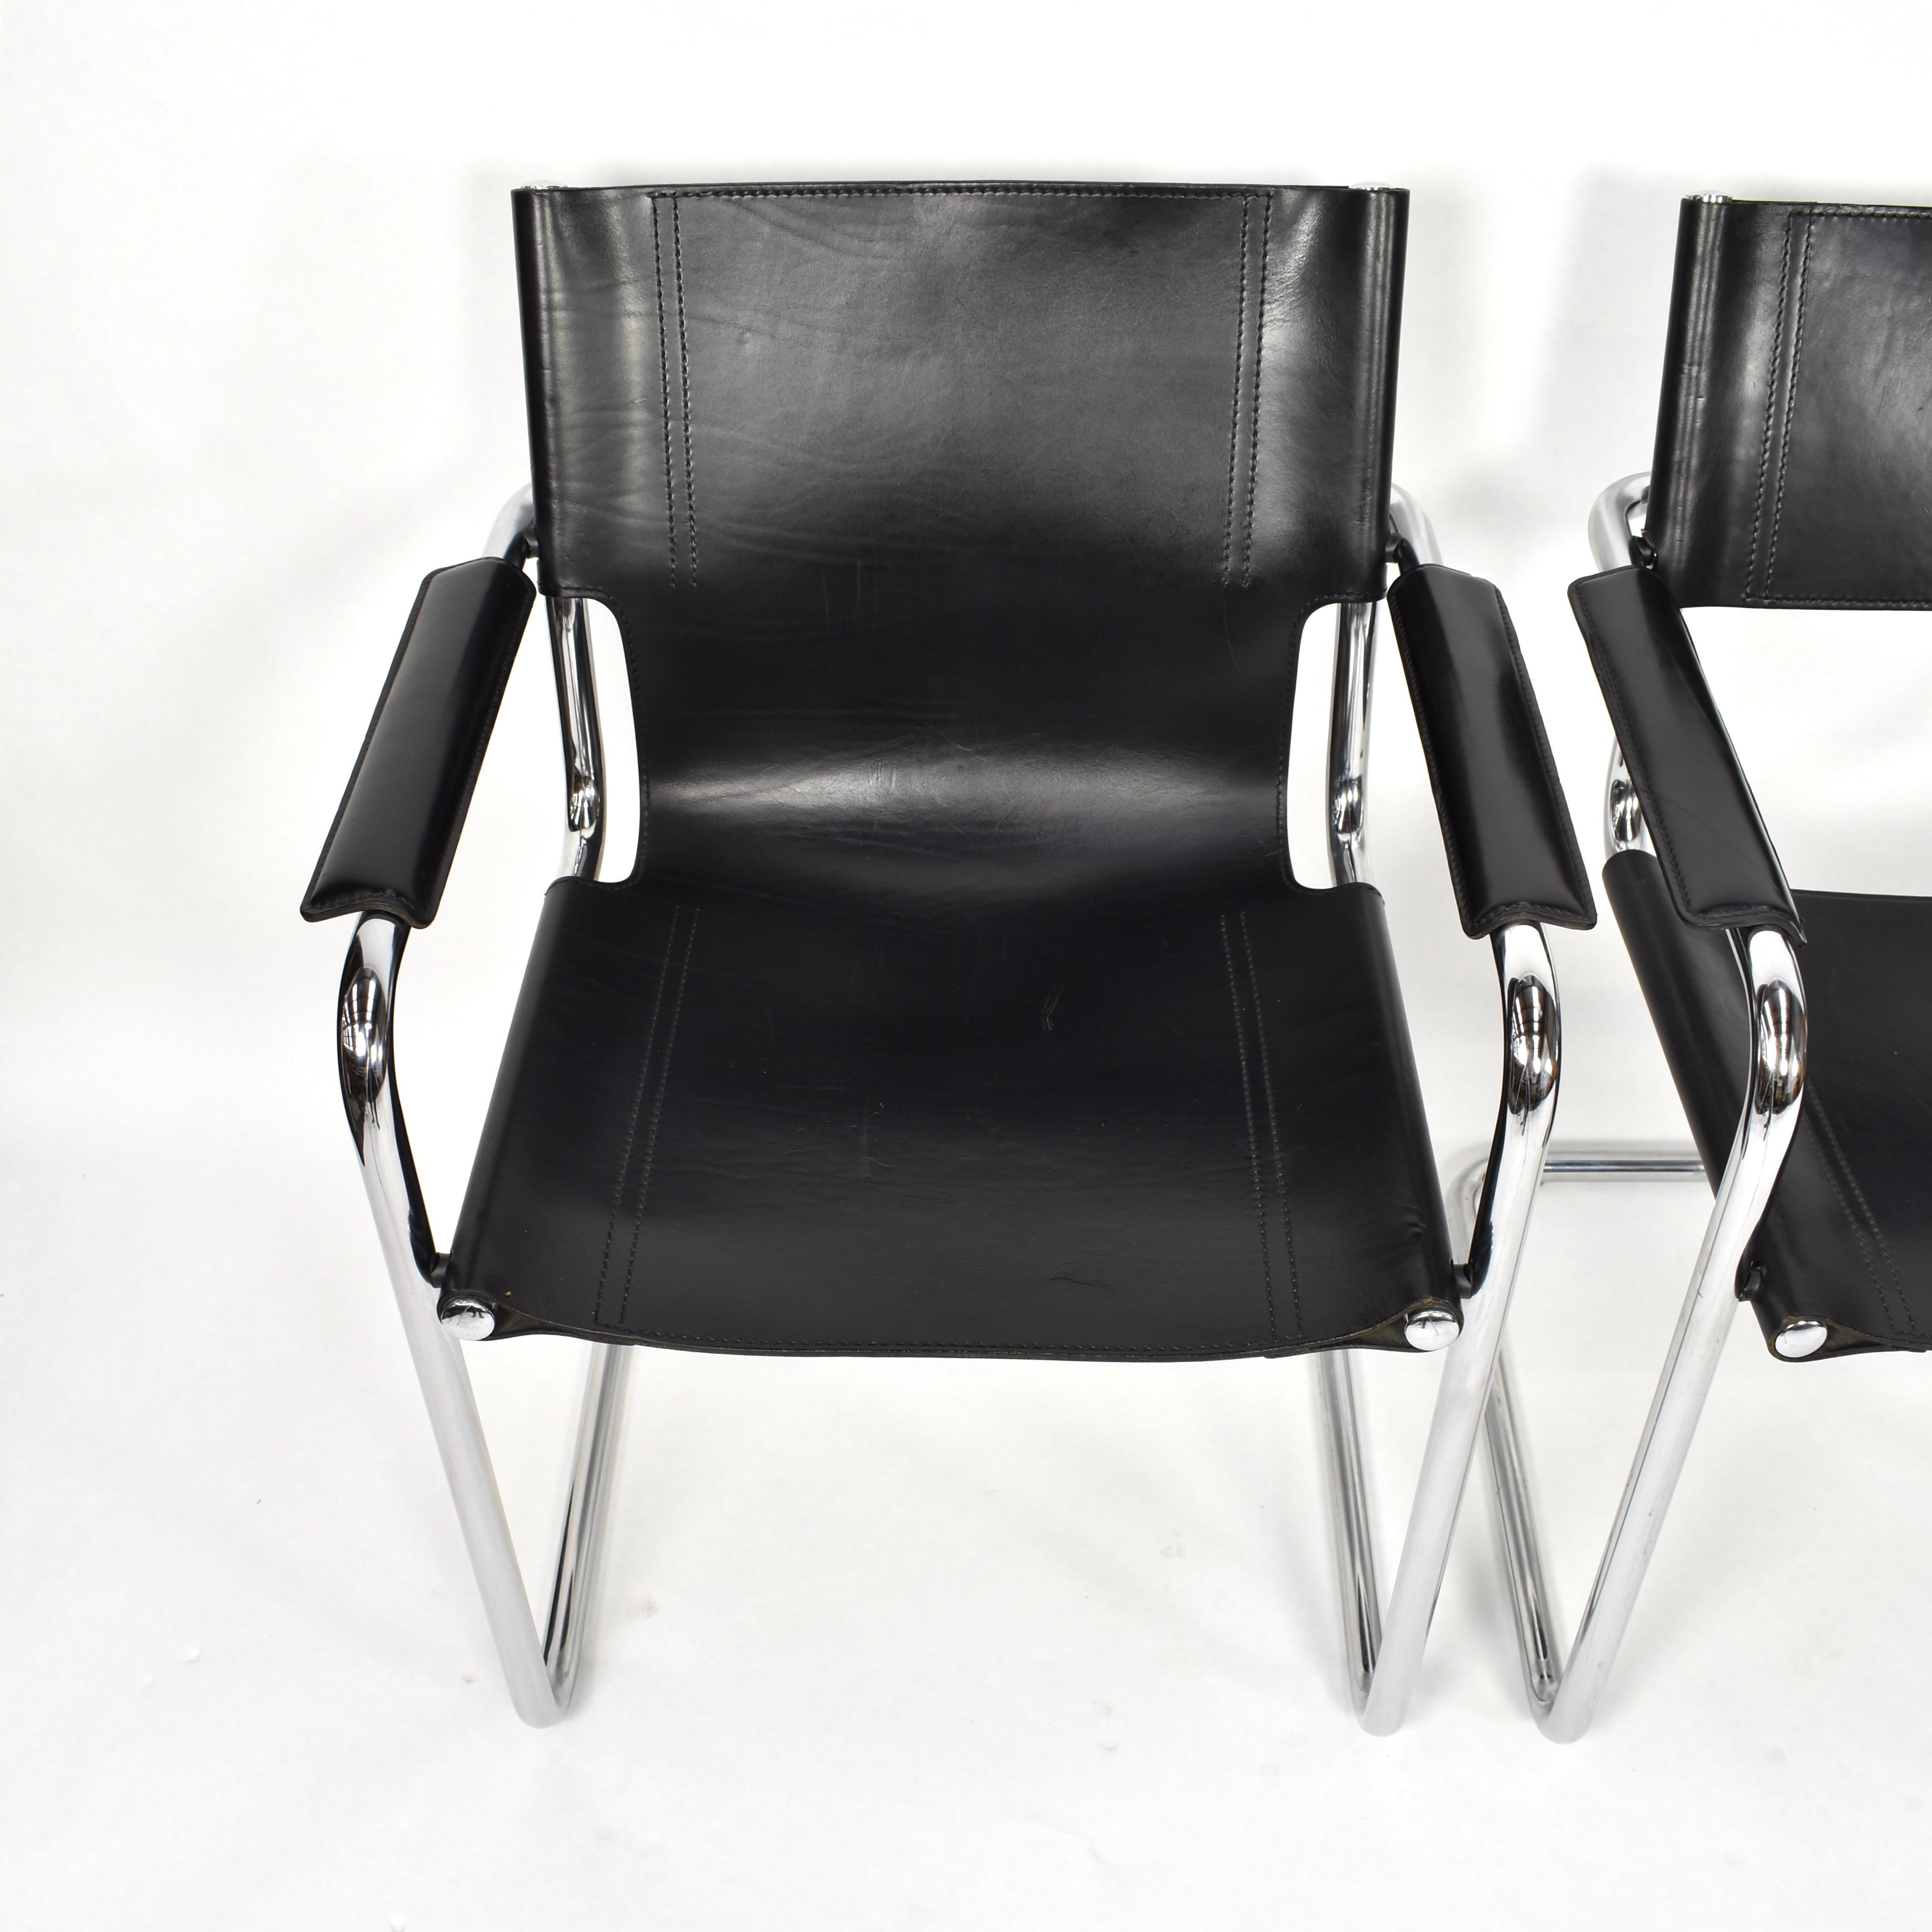 Bauhaus Set of Four Mart Stam Chairs by Matteo Grassi, Italy, 1970s